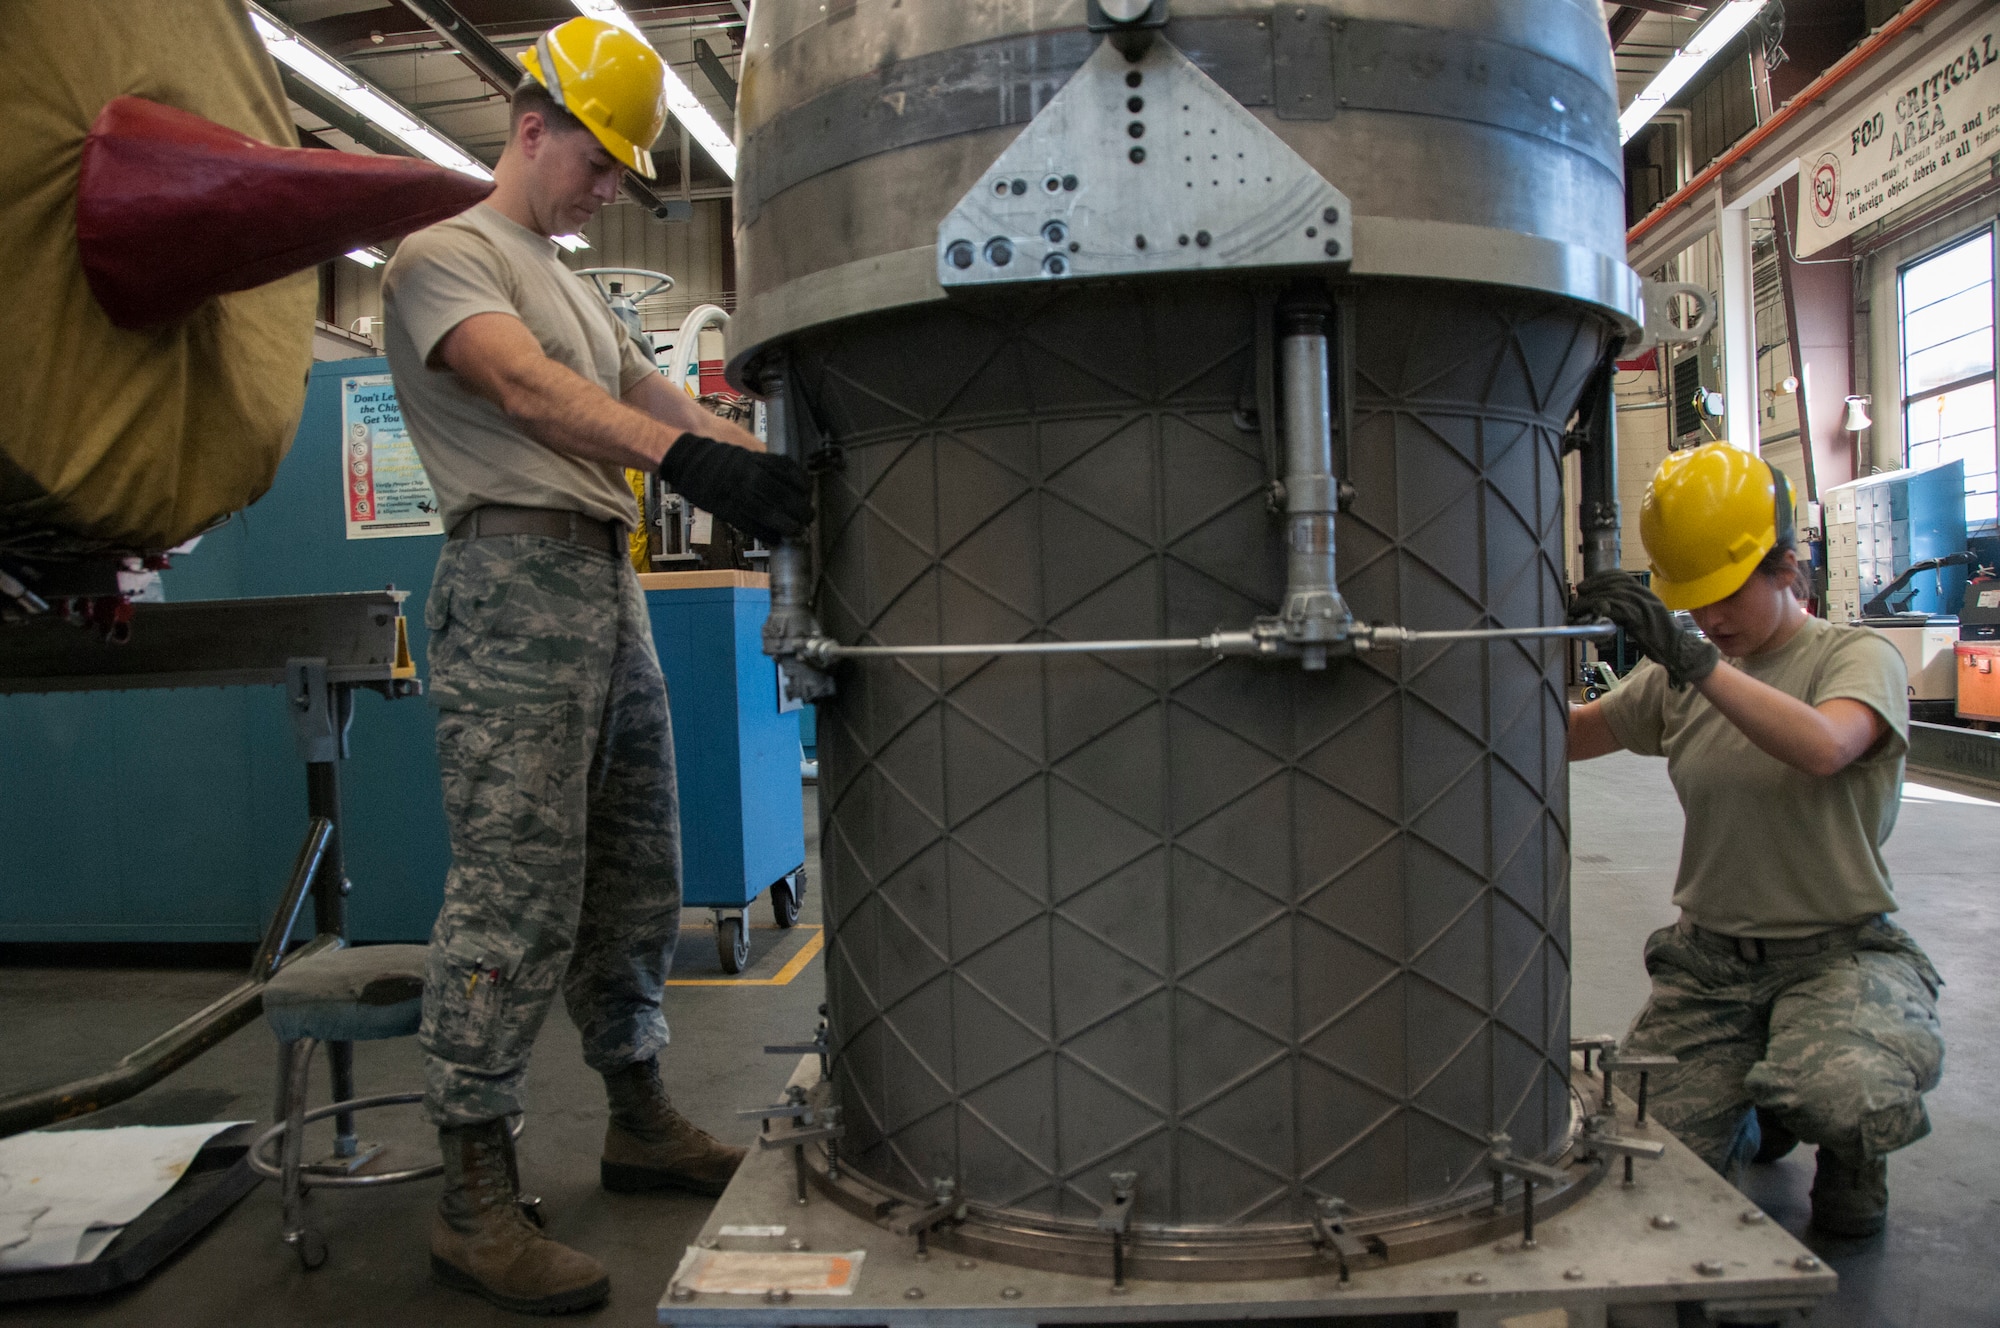 Senior Airman Andrew Feighery, 104th Maintenance Squadron aircraft engine mechanic, removes an augmenter module Oct. 17, 2018, at Barnes Air National Guard Base, Massachusetts. Feighery's recent deployment experience and mechanical engineering studies at The University of Massachusetts have further developed his skills as a mechanic. (U.S. Air National Guard Photo by Airman 1st Class Randy Burlingame)